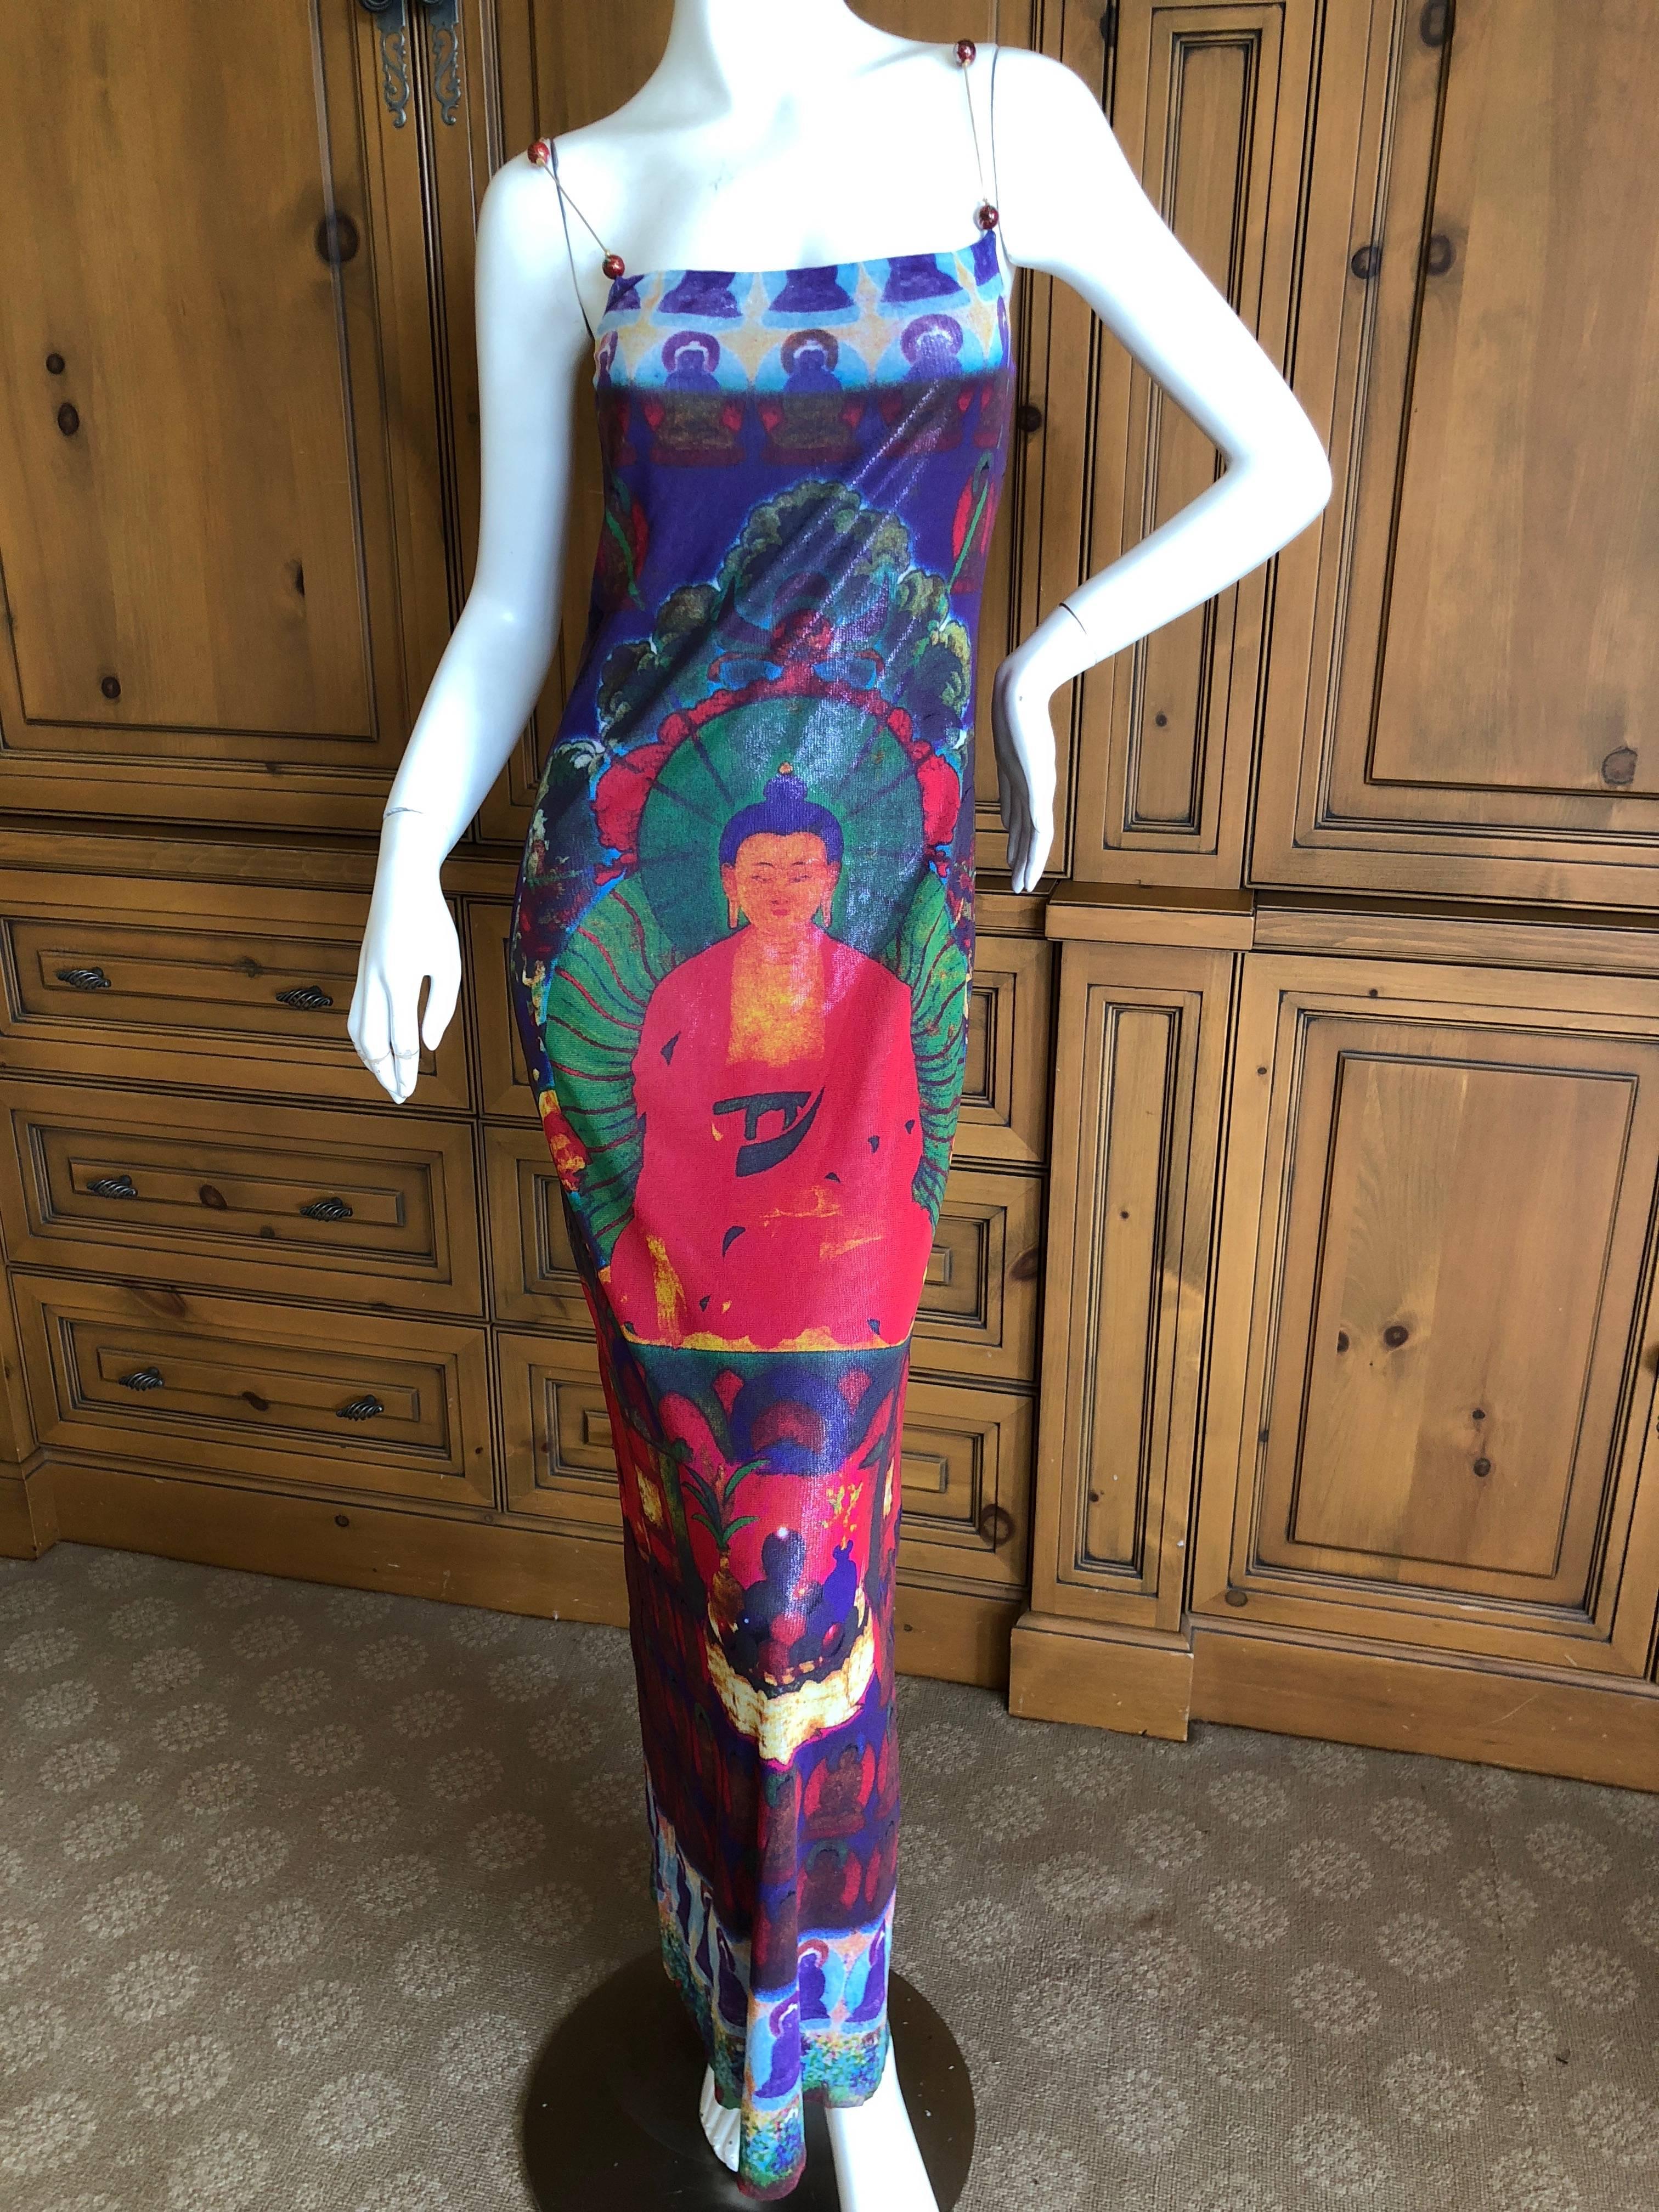 Vivienne Tam Vintage Buddha Dress
This is such a charming piece, with beautiful Cloisonné beads on the straps


Bust  36